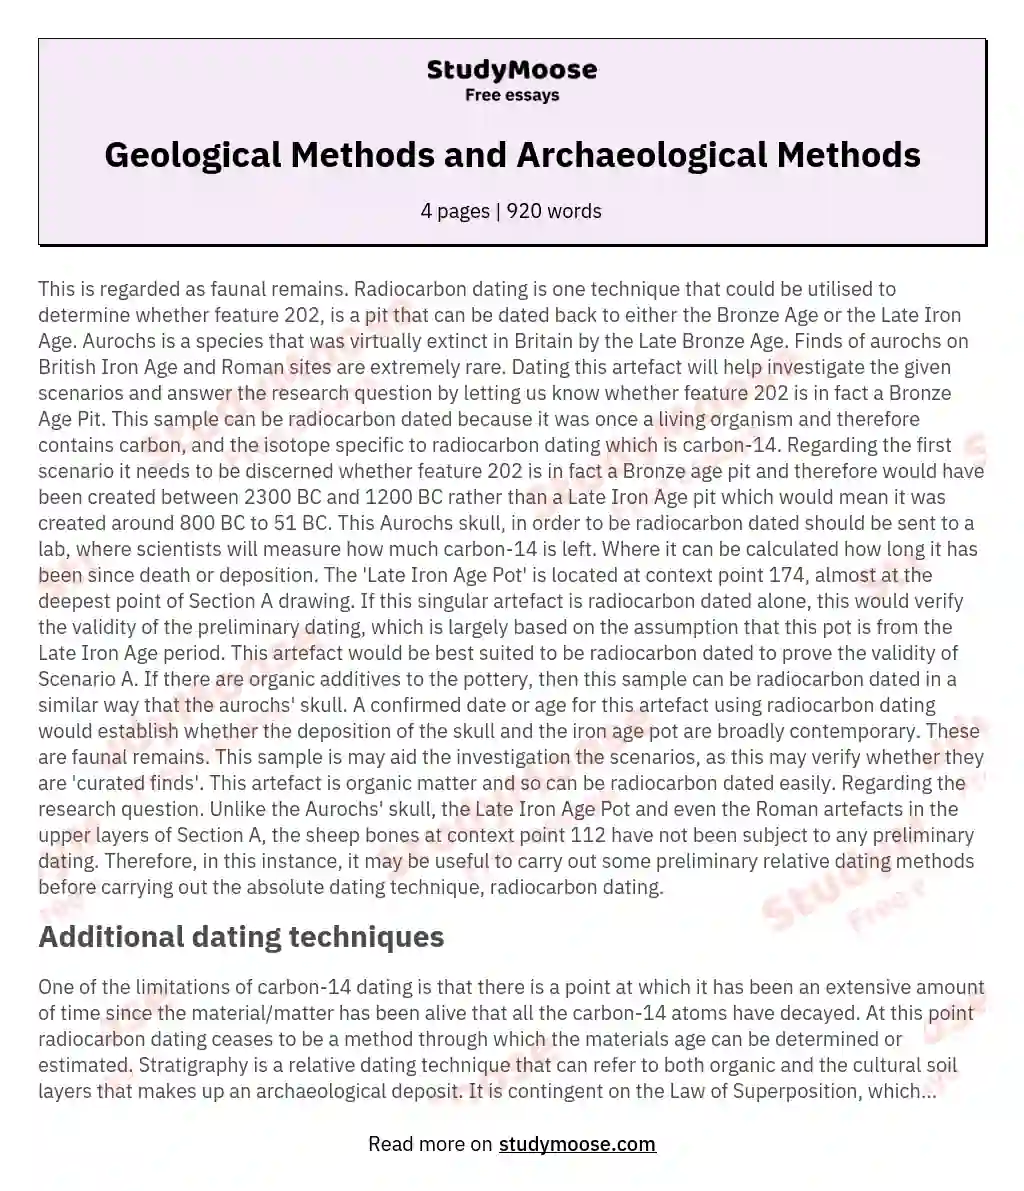 Geological Methods and Archaeological Methods